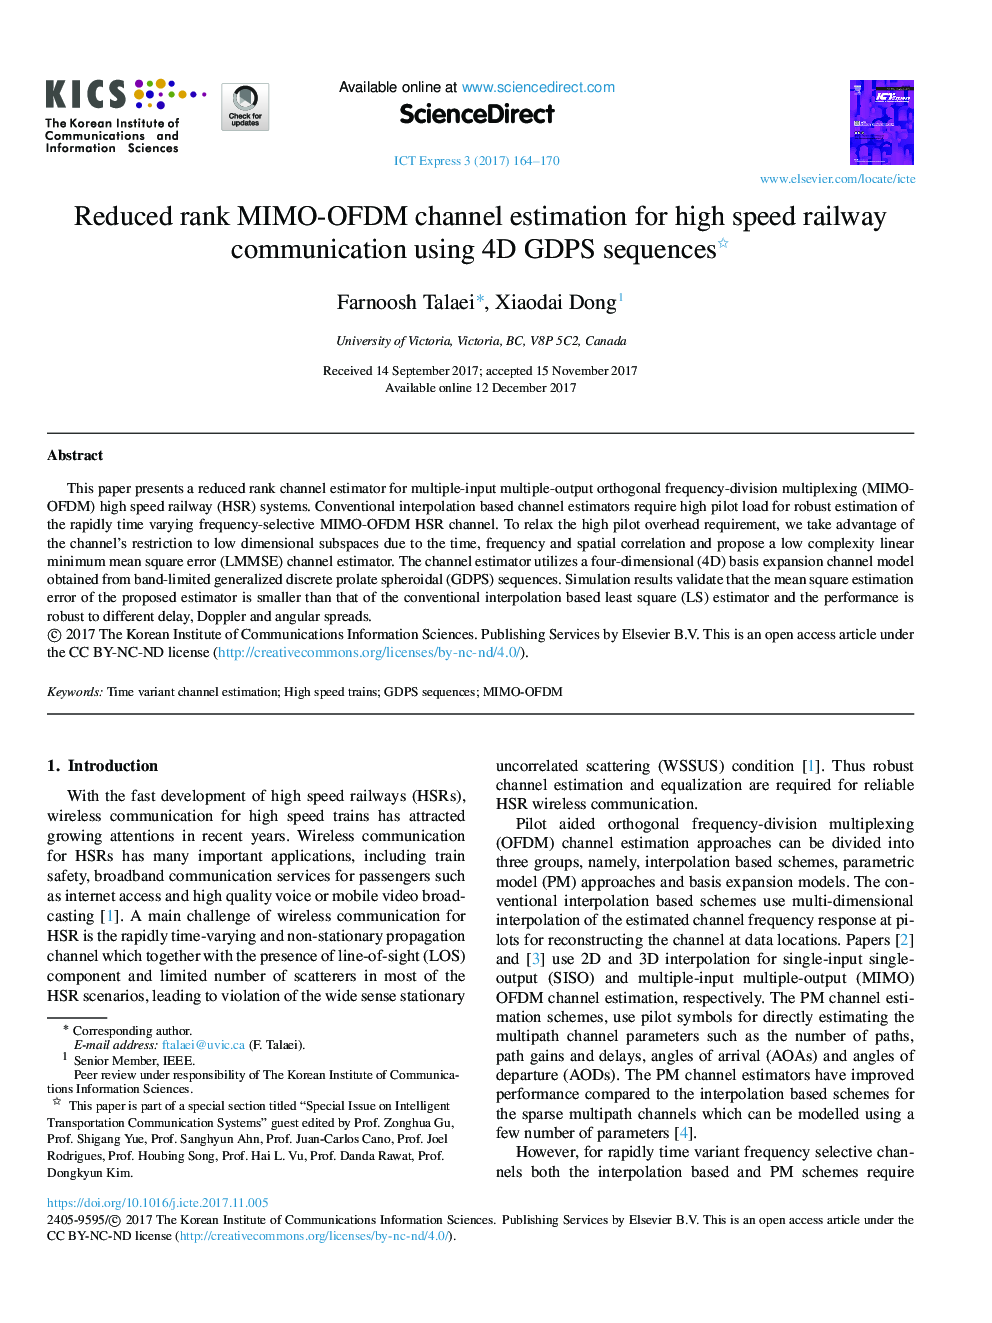 Reduced rank MIMO-OFDM channel estimation for high speed railway communication using 4D GDPS sequences